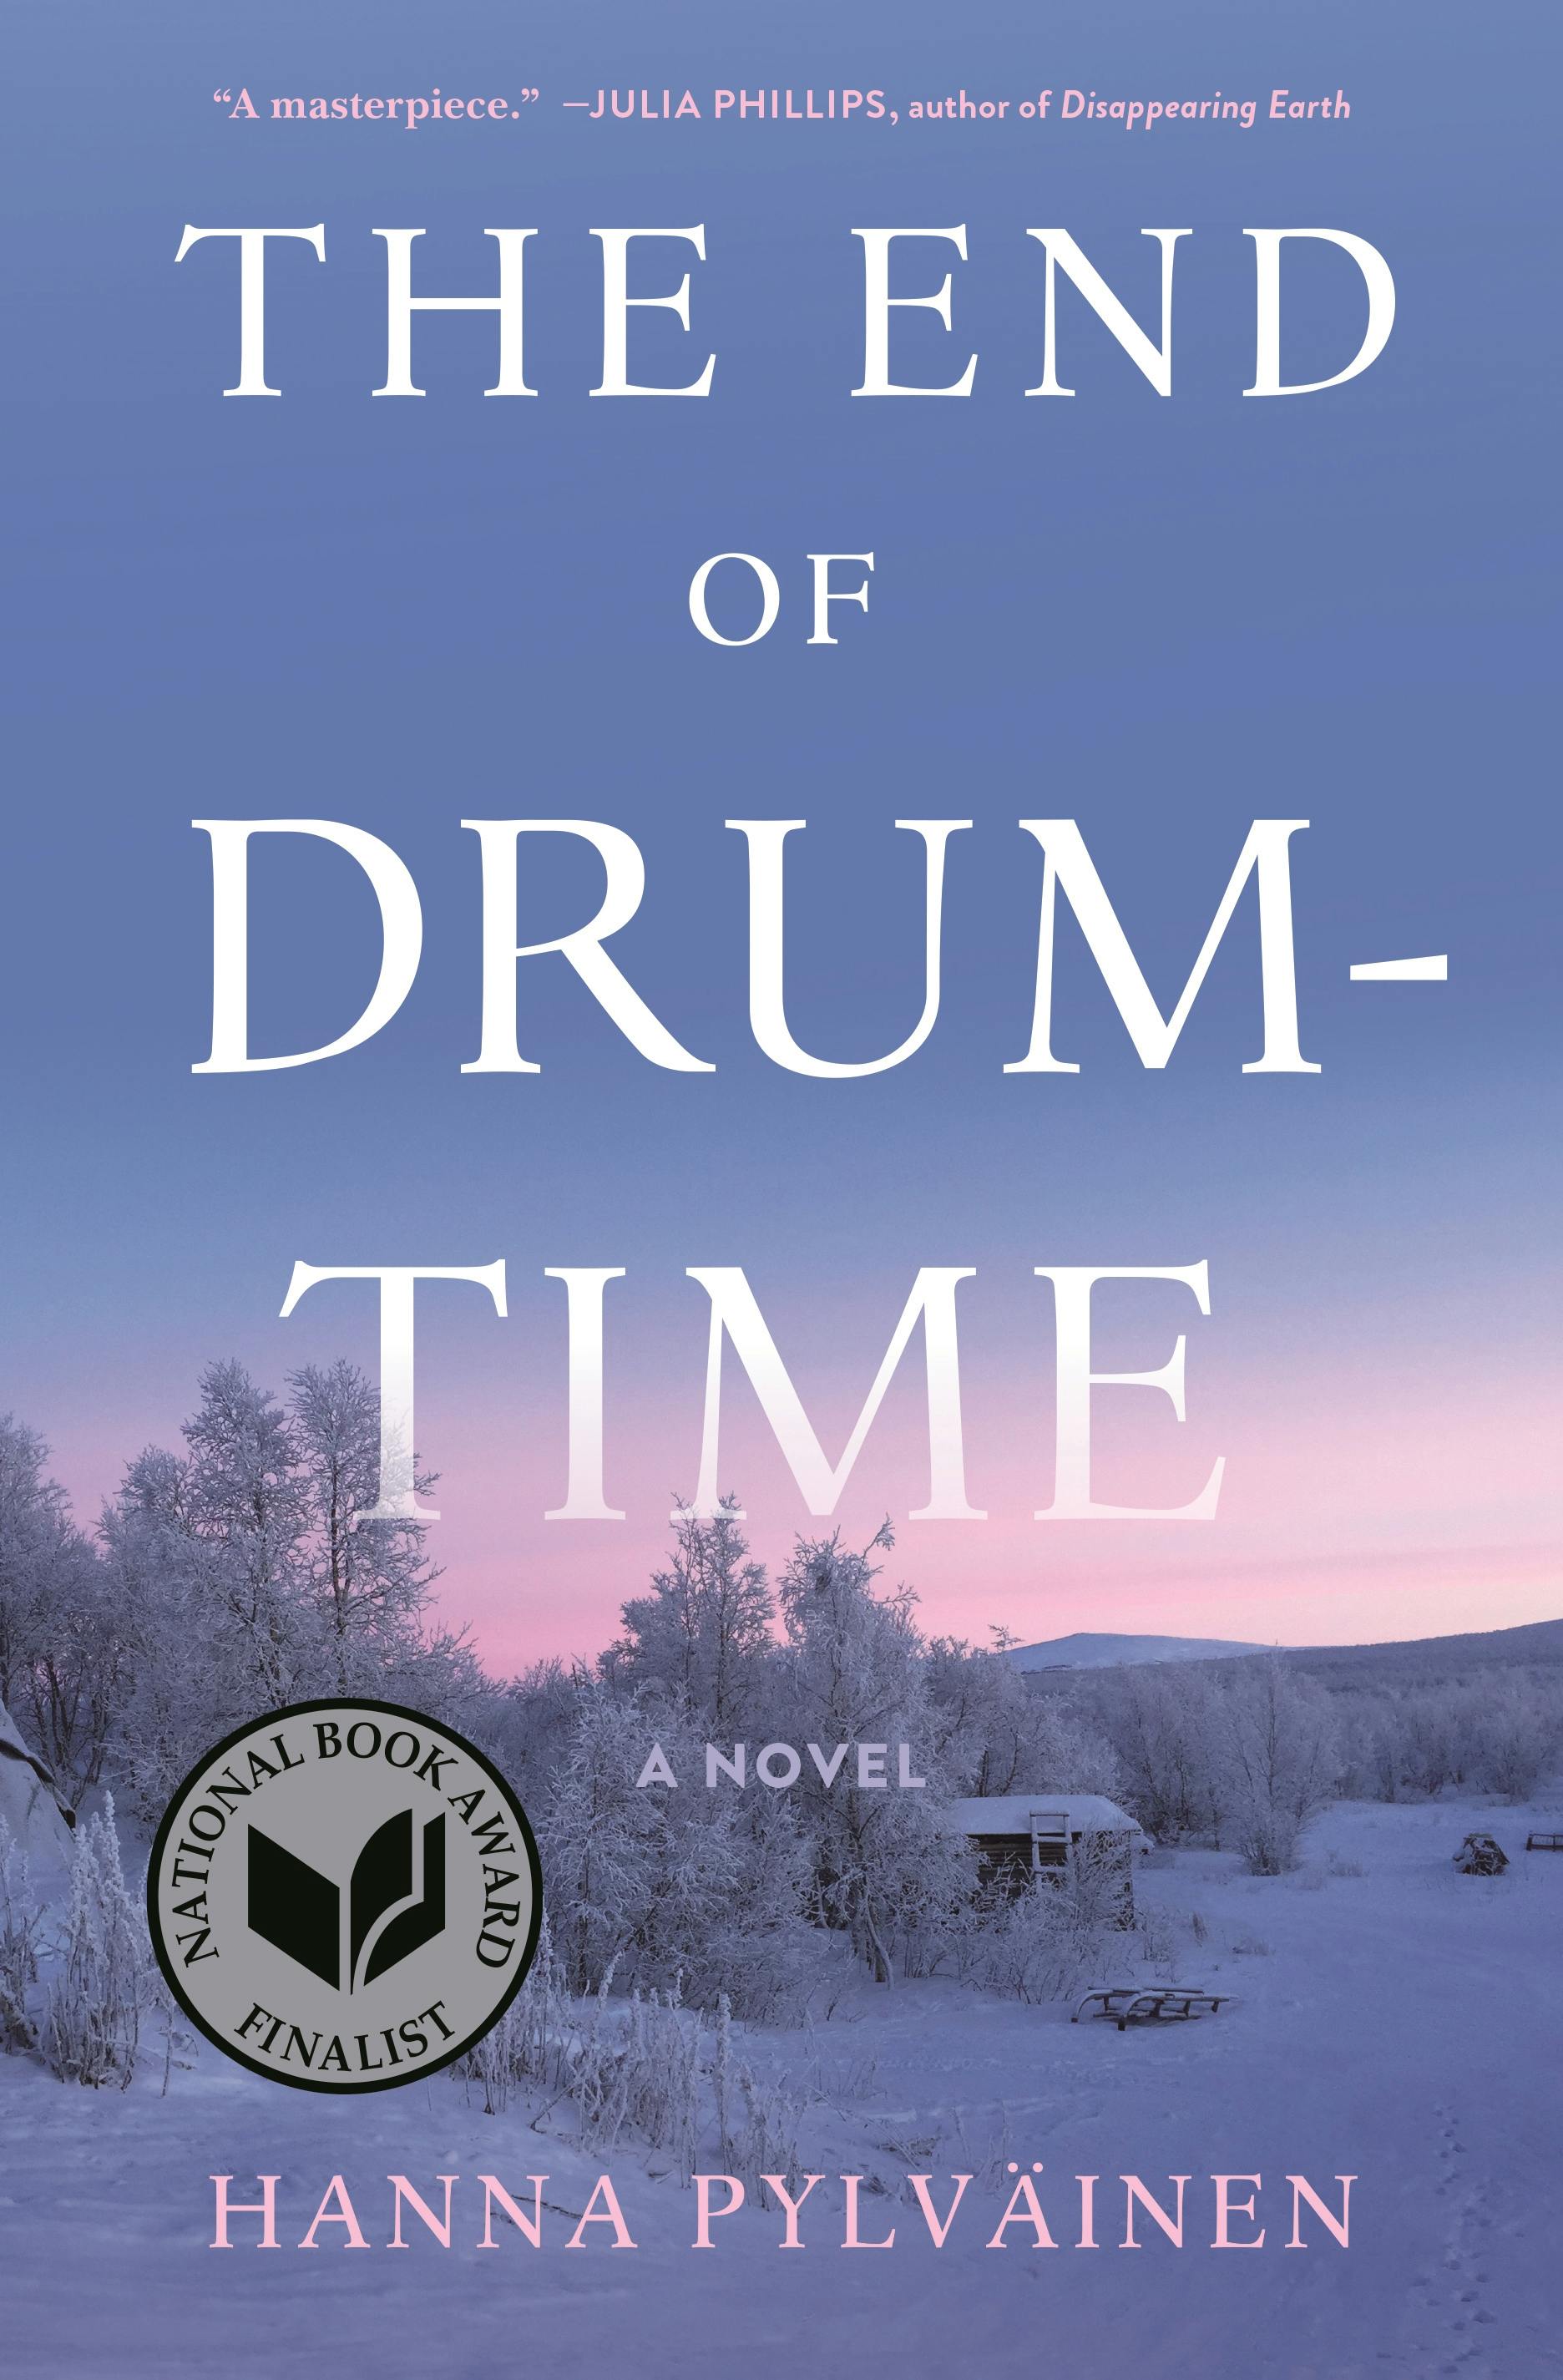 End of Drum-Time, The by Hanna Pylväinen